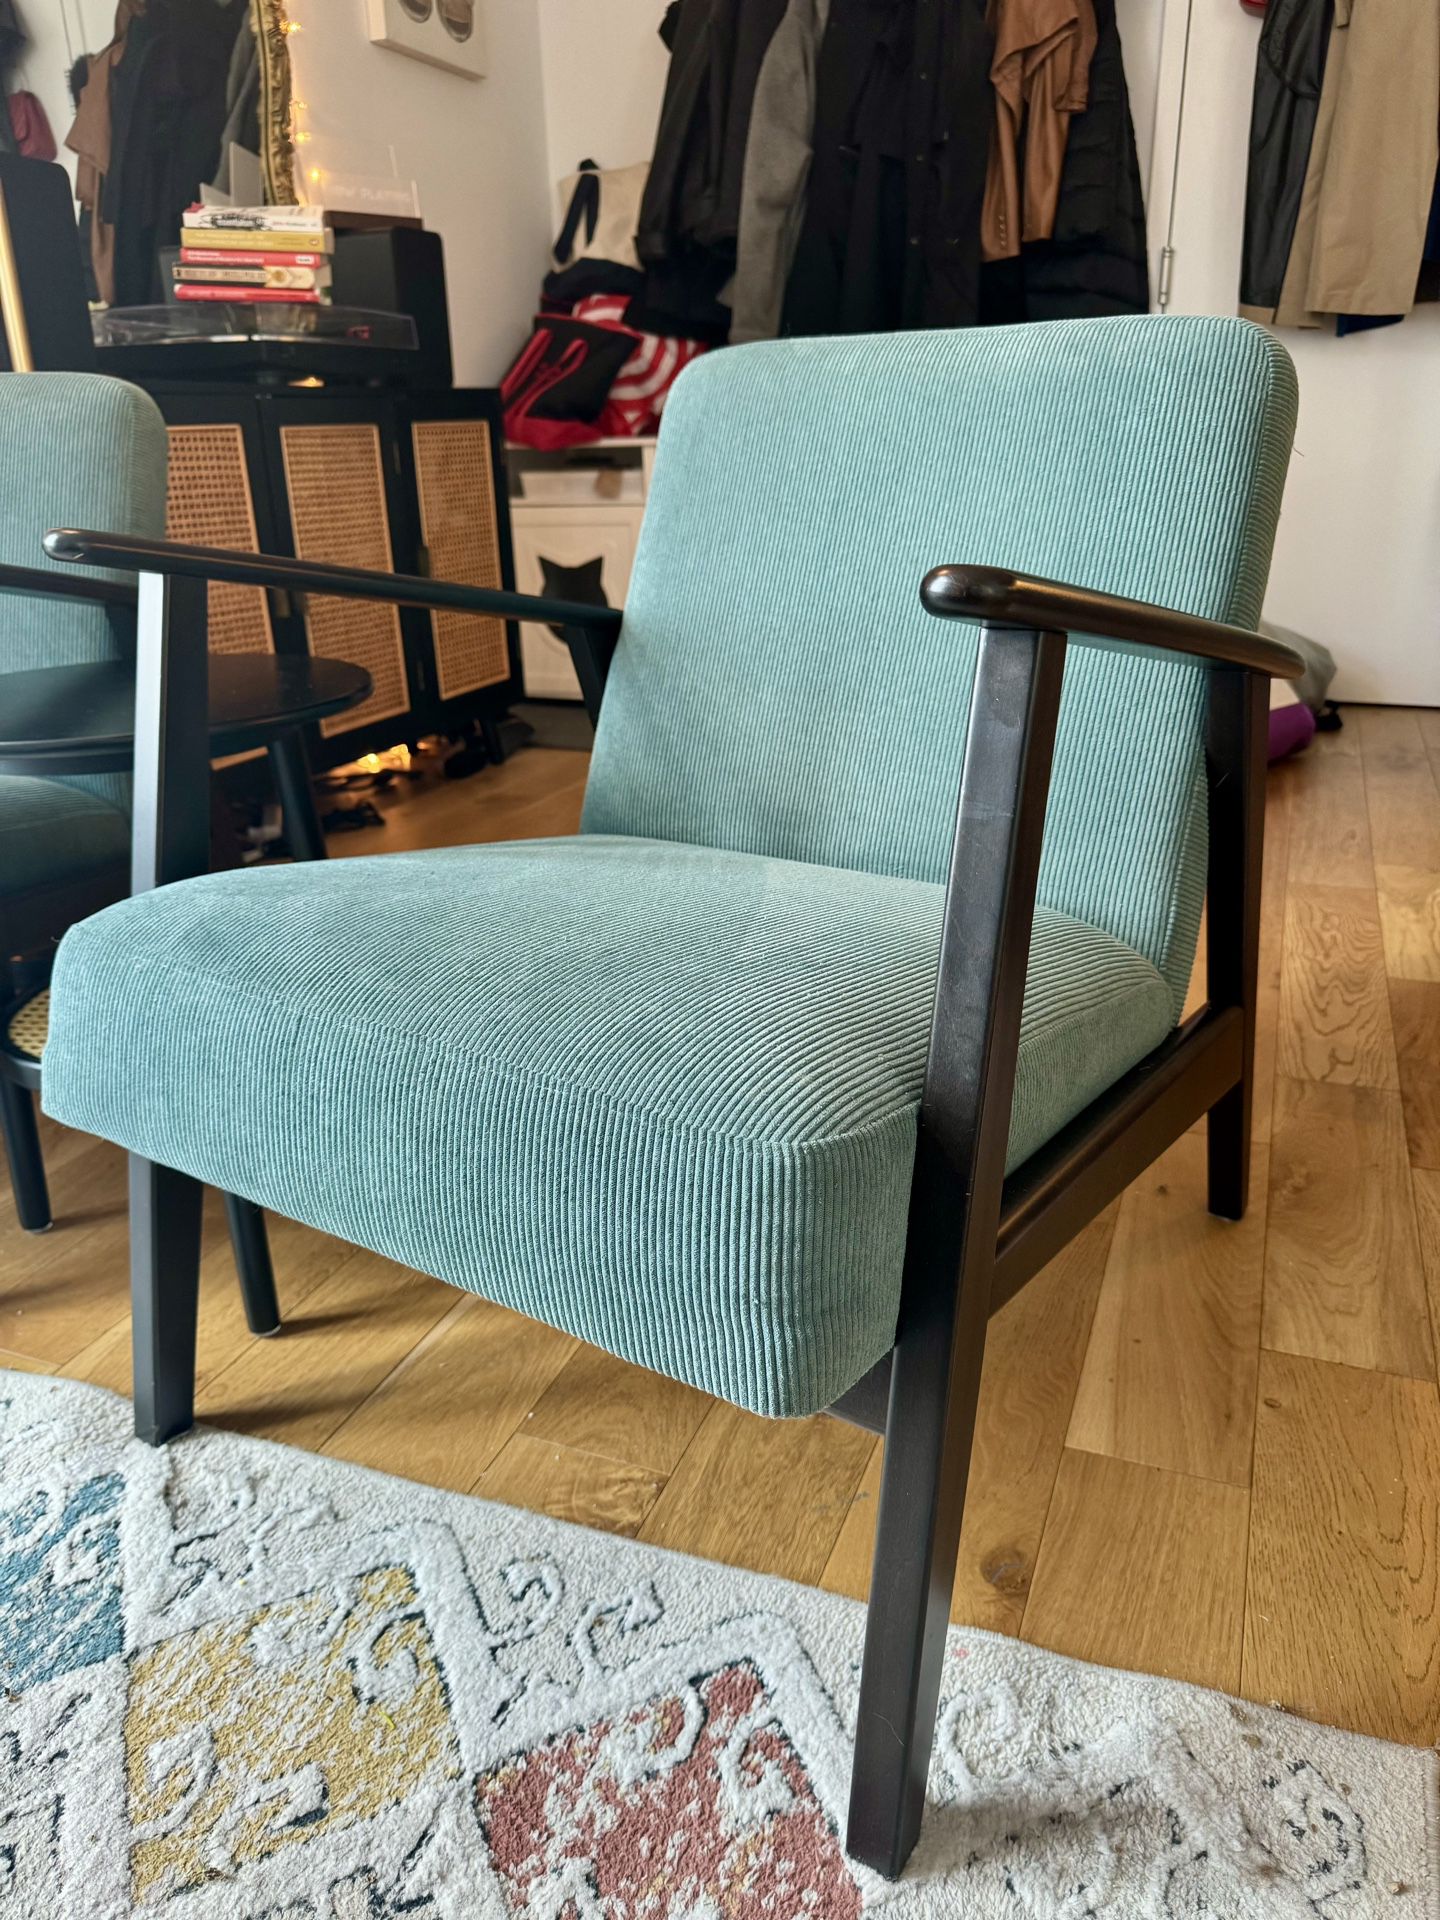 Practically NEW Mid-Century Modern Retro Armchairs / Chairs